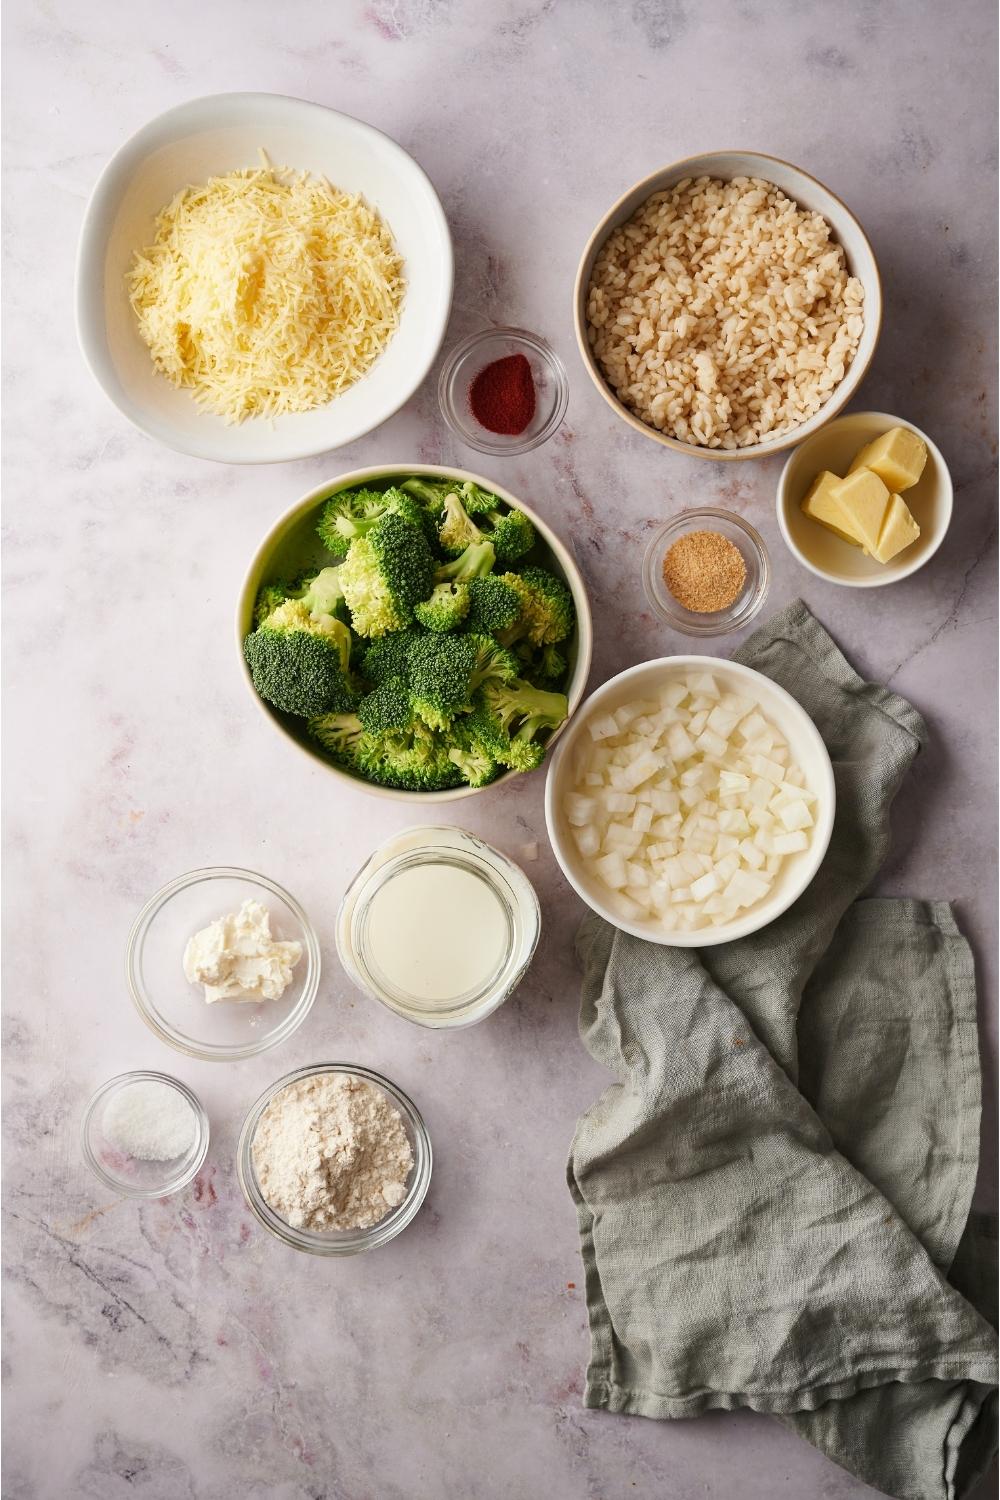 An assortment of ingredients for broccoli rice casserole including bowls of broccoli, rice, cheese, milk, onions, butter, and spices.